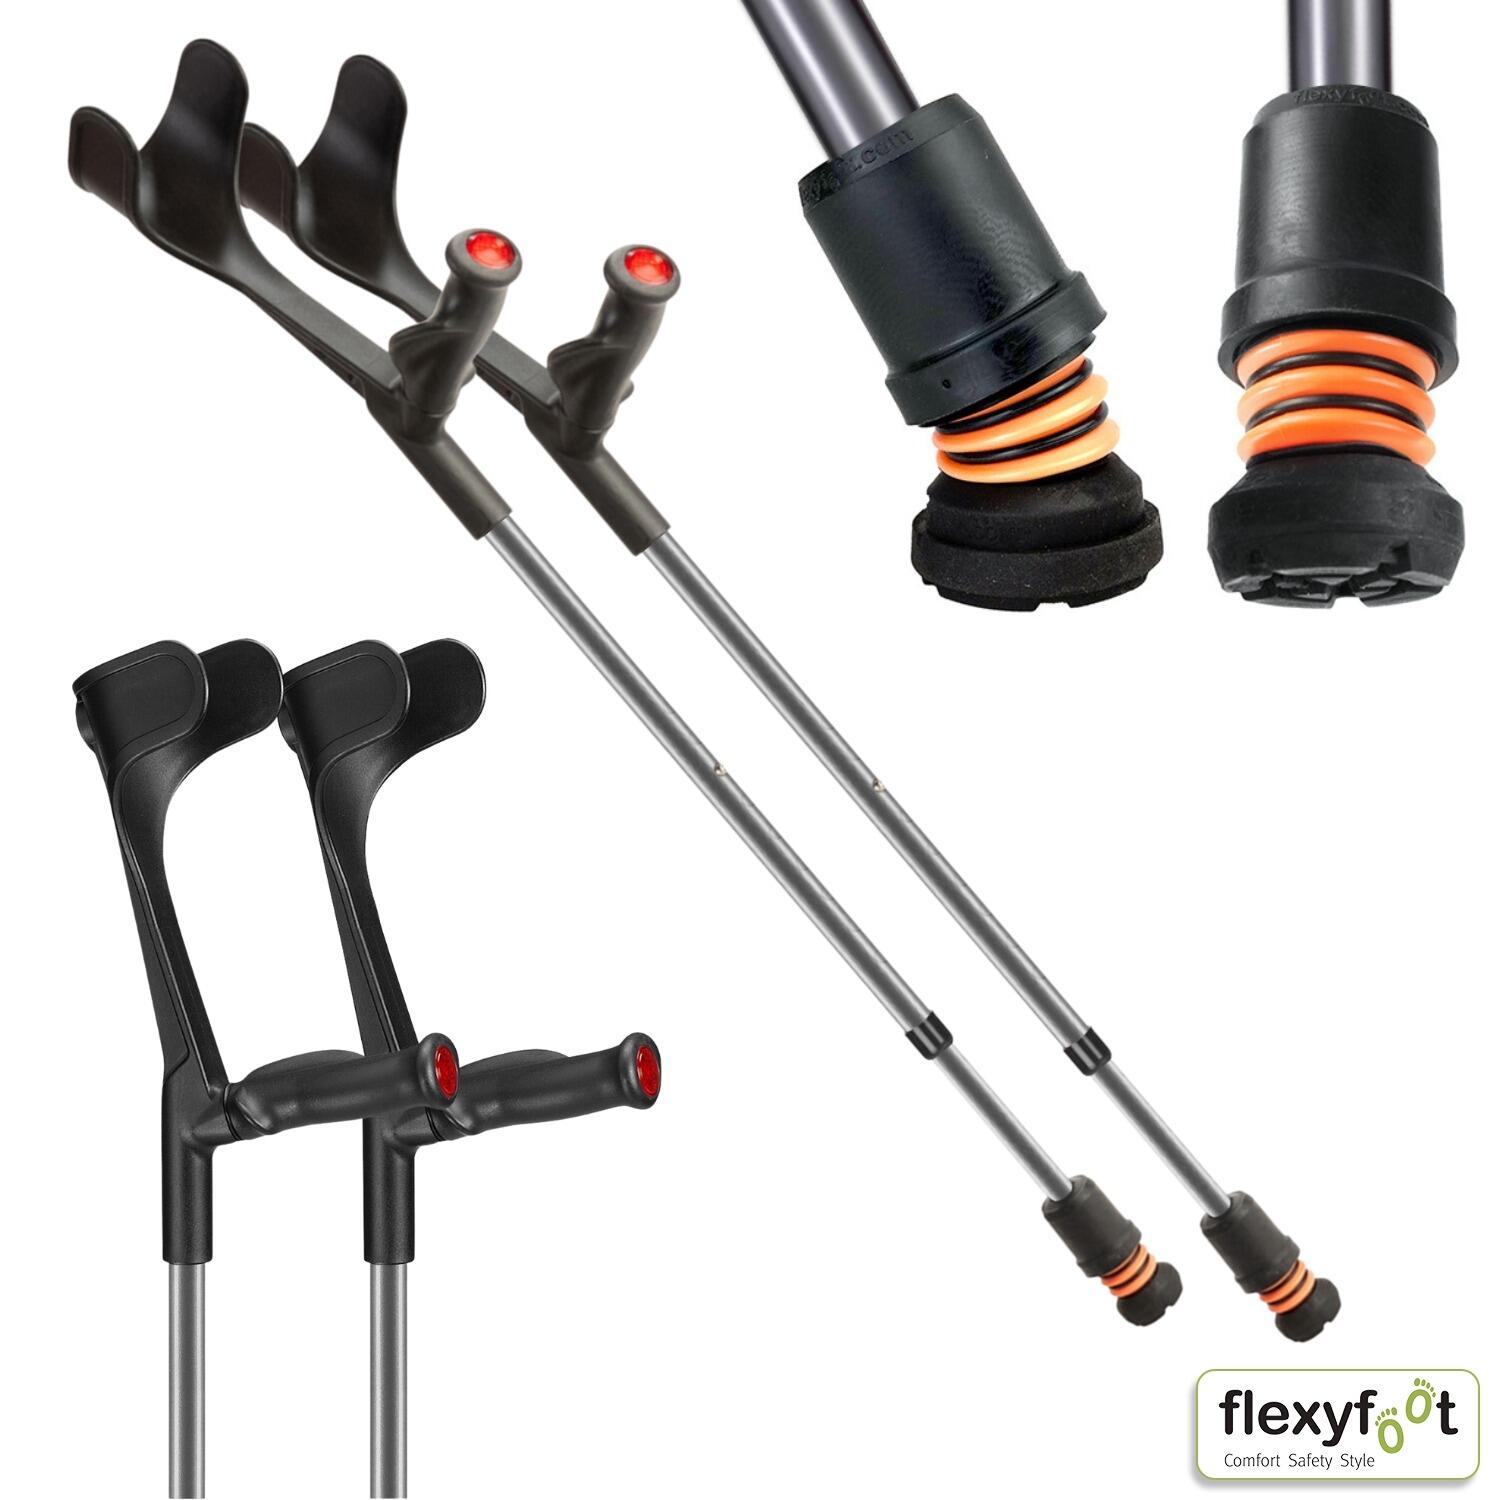 A pair of Grey Flexyfoot Comfort Grip Open Cuff Crutches